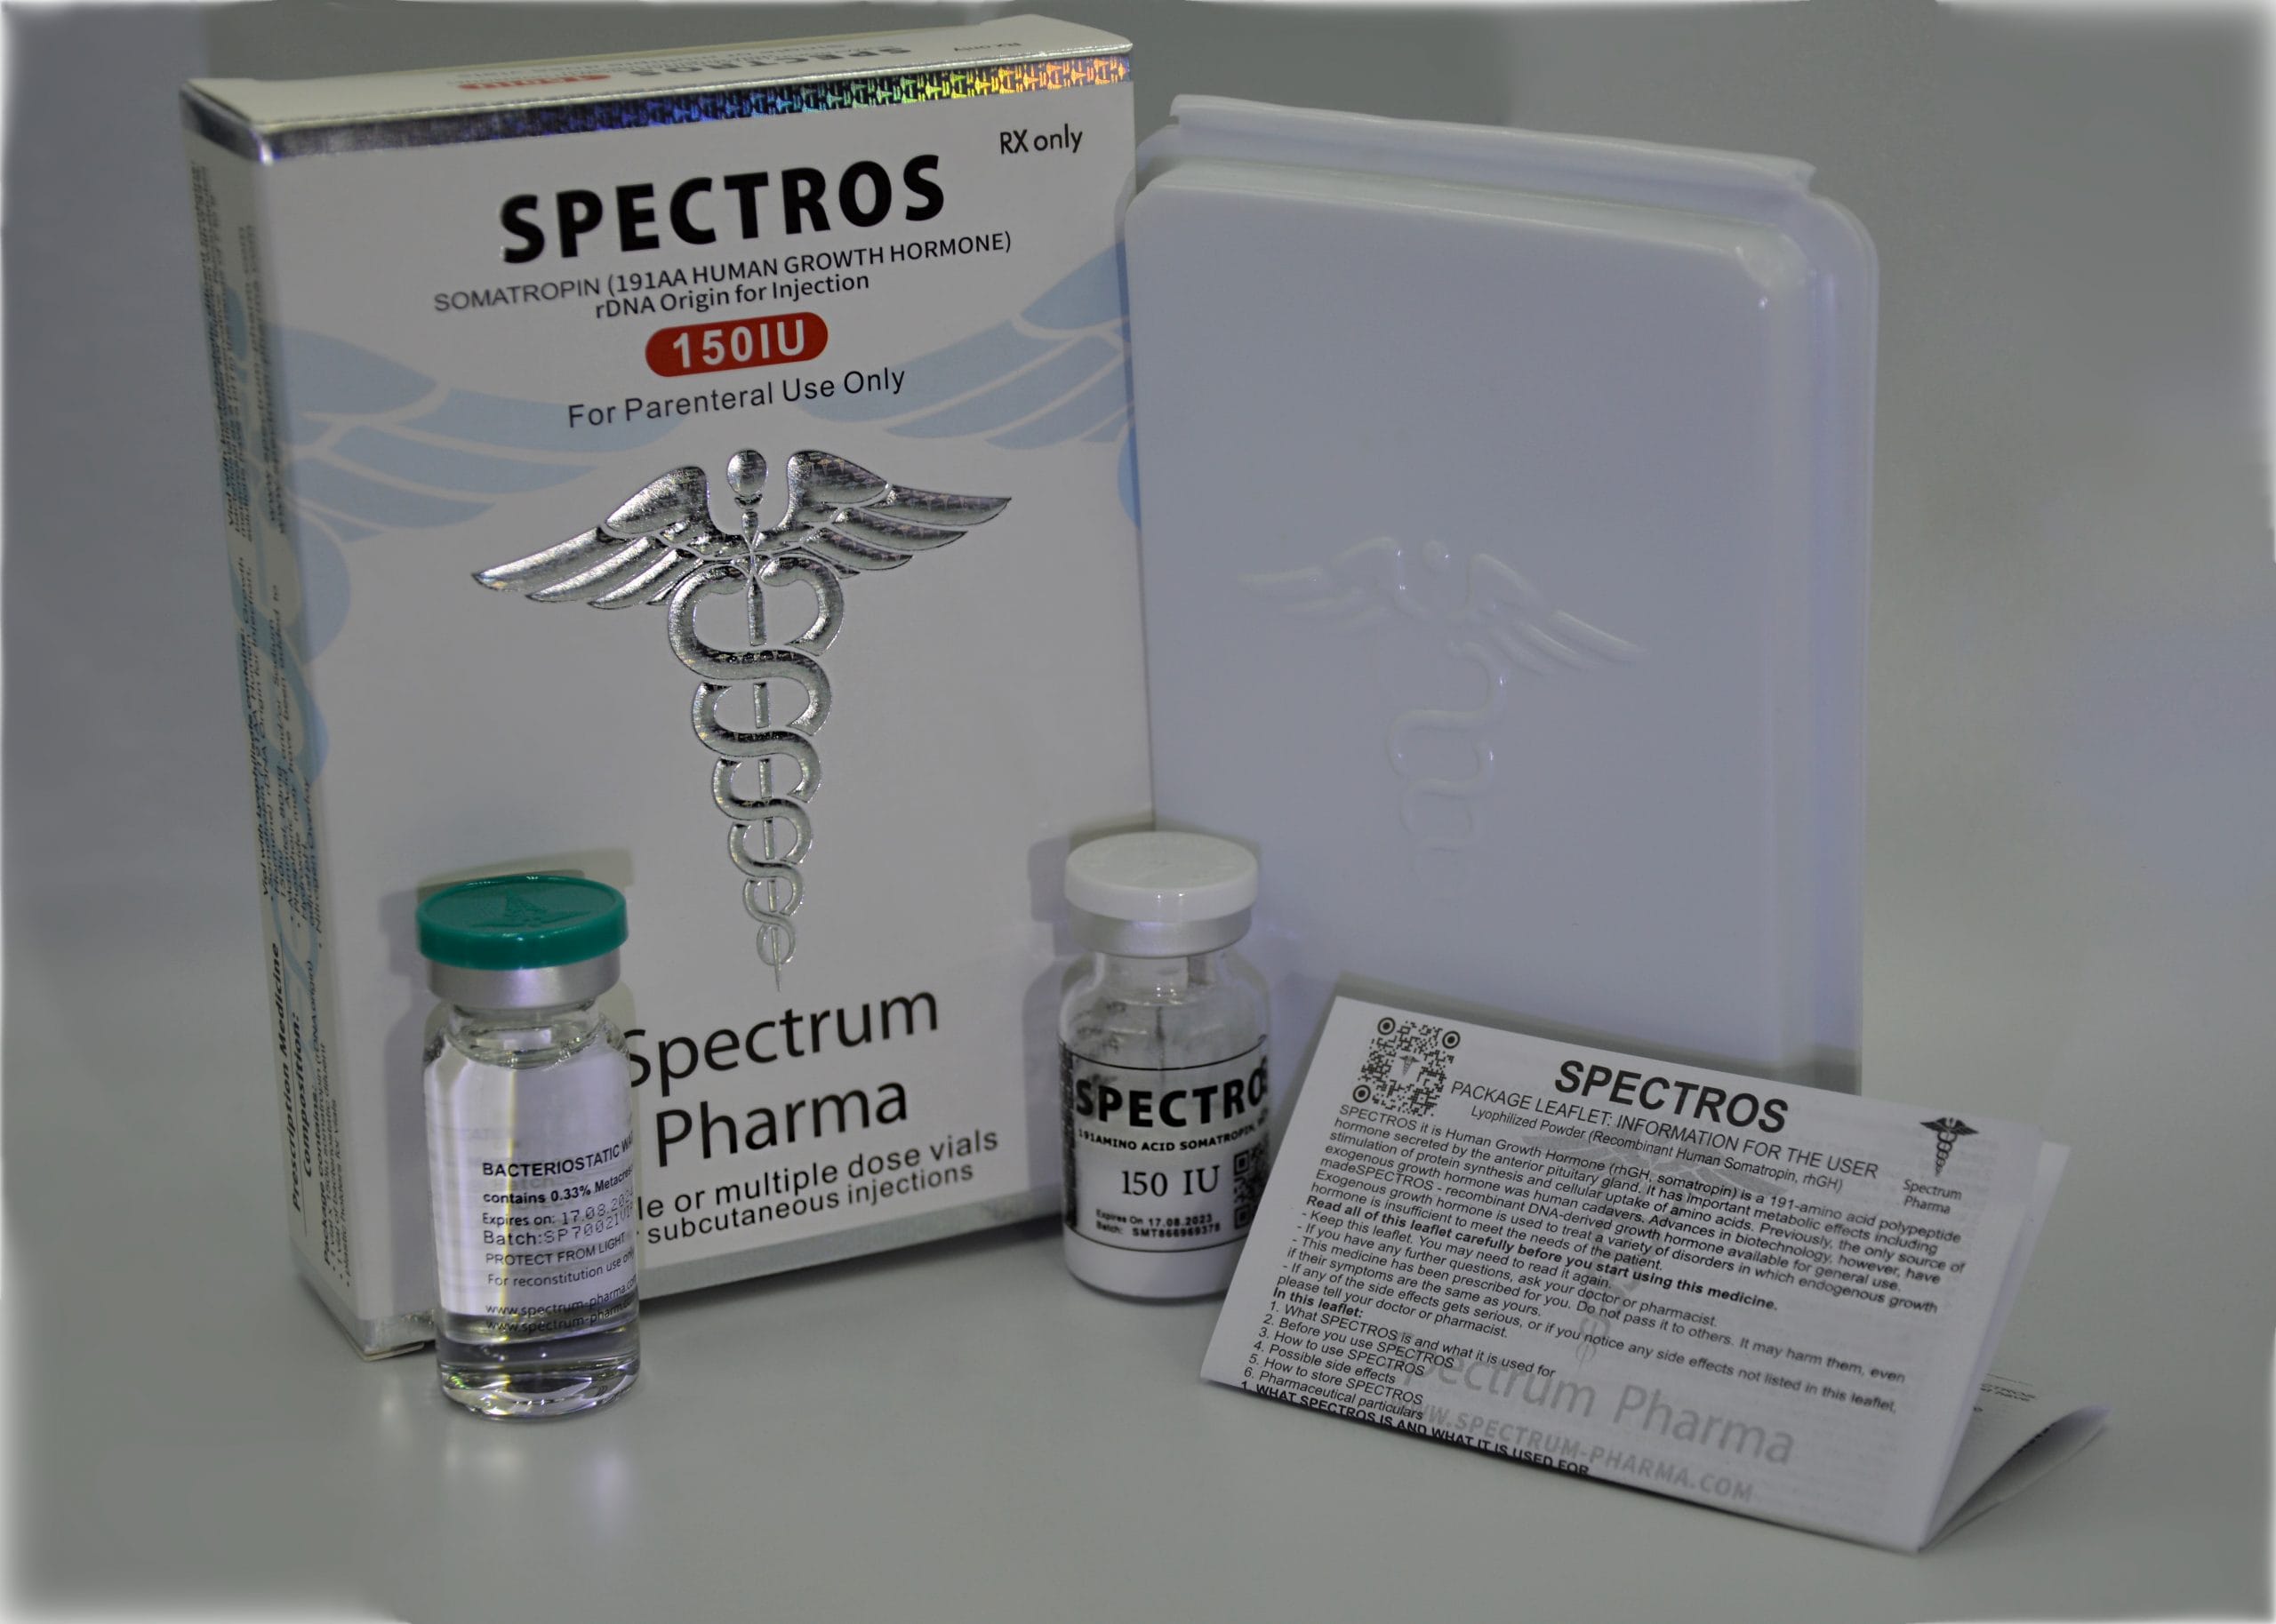 SPECTROS 150 IU with bacteriostatic water is added